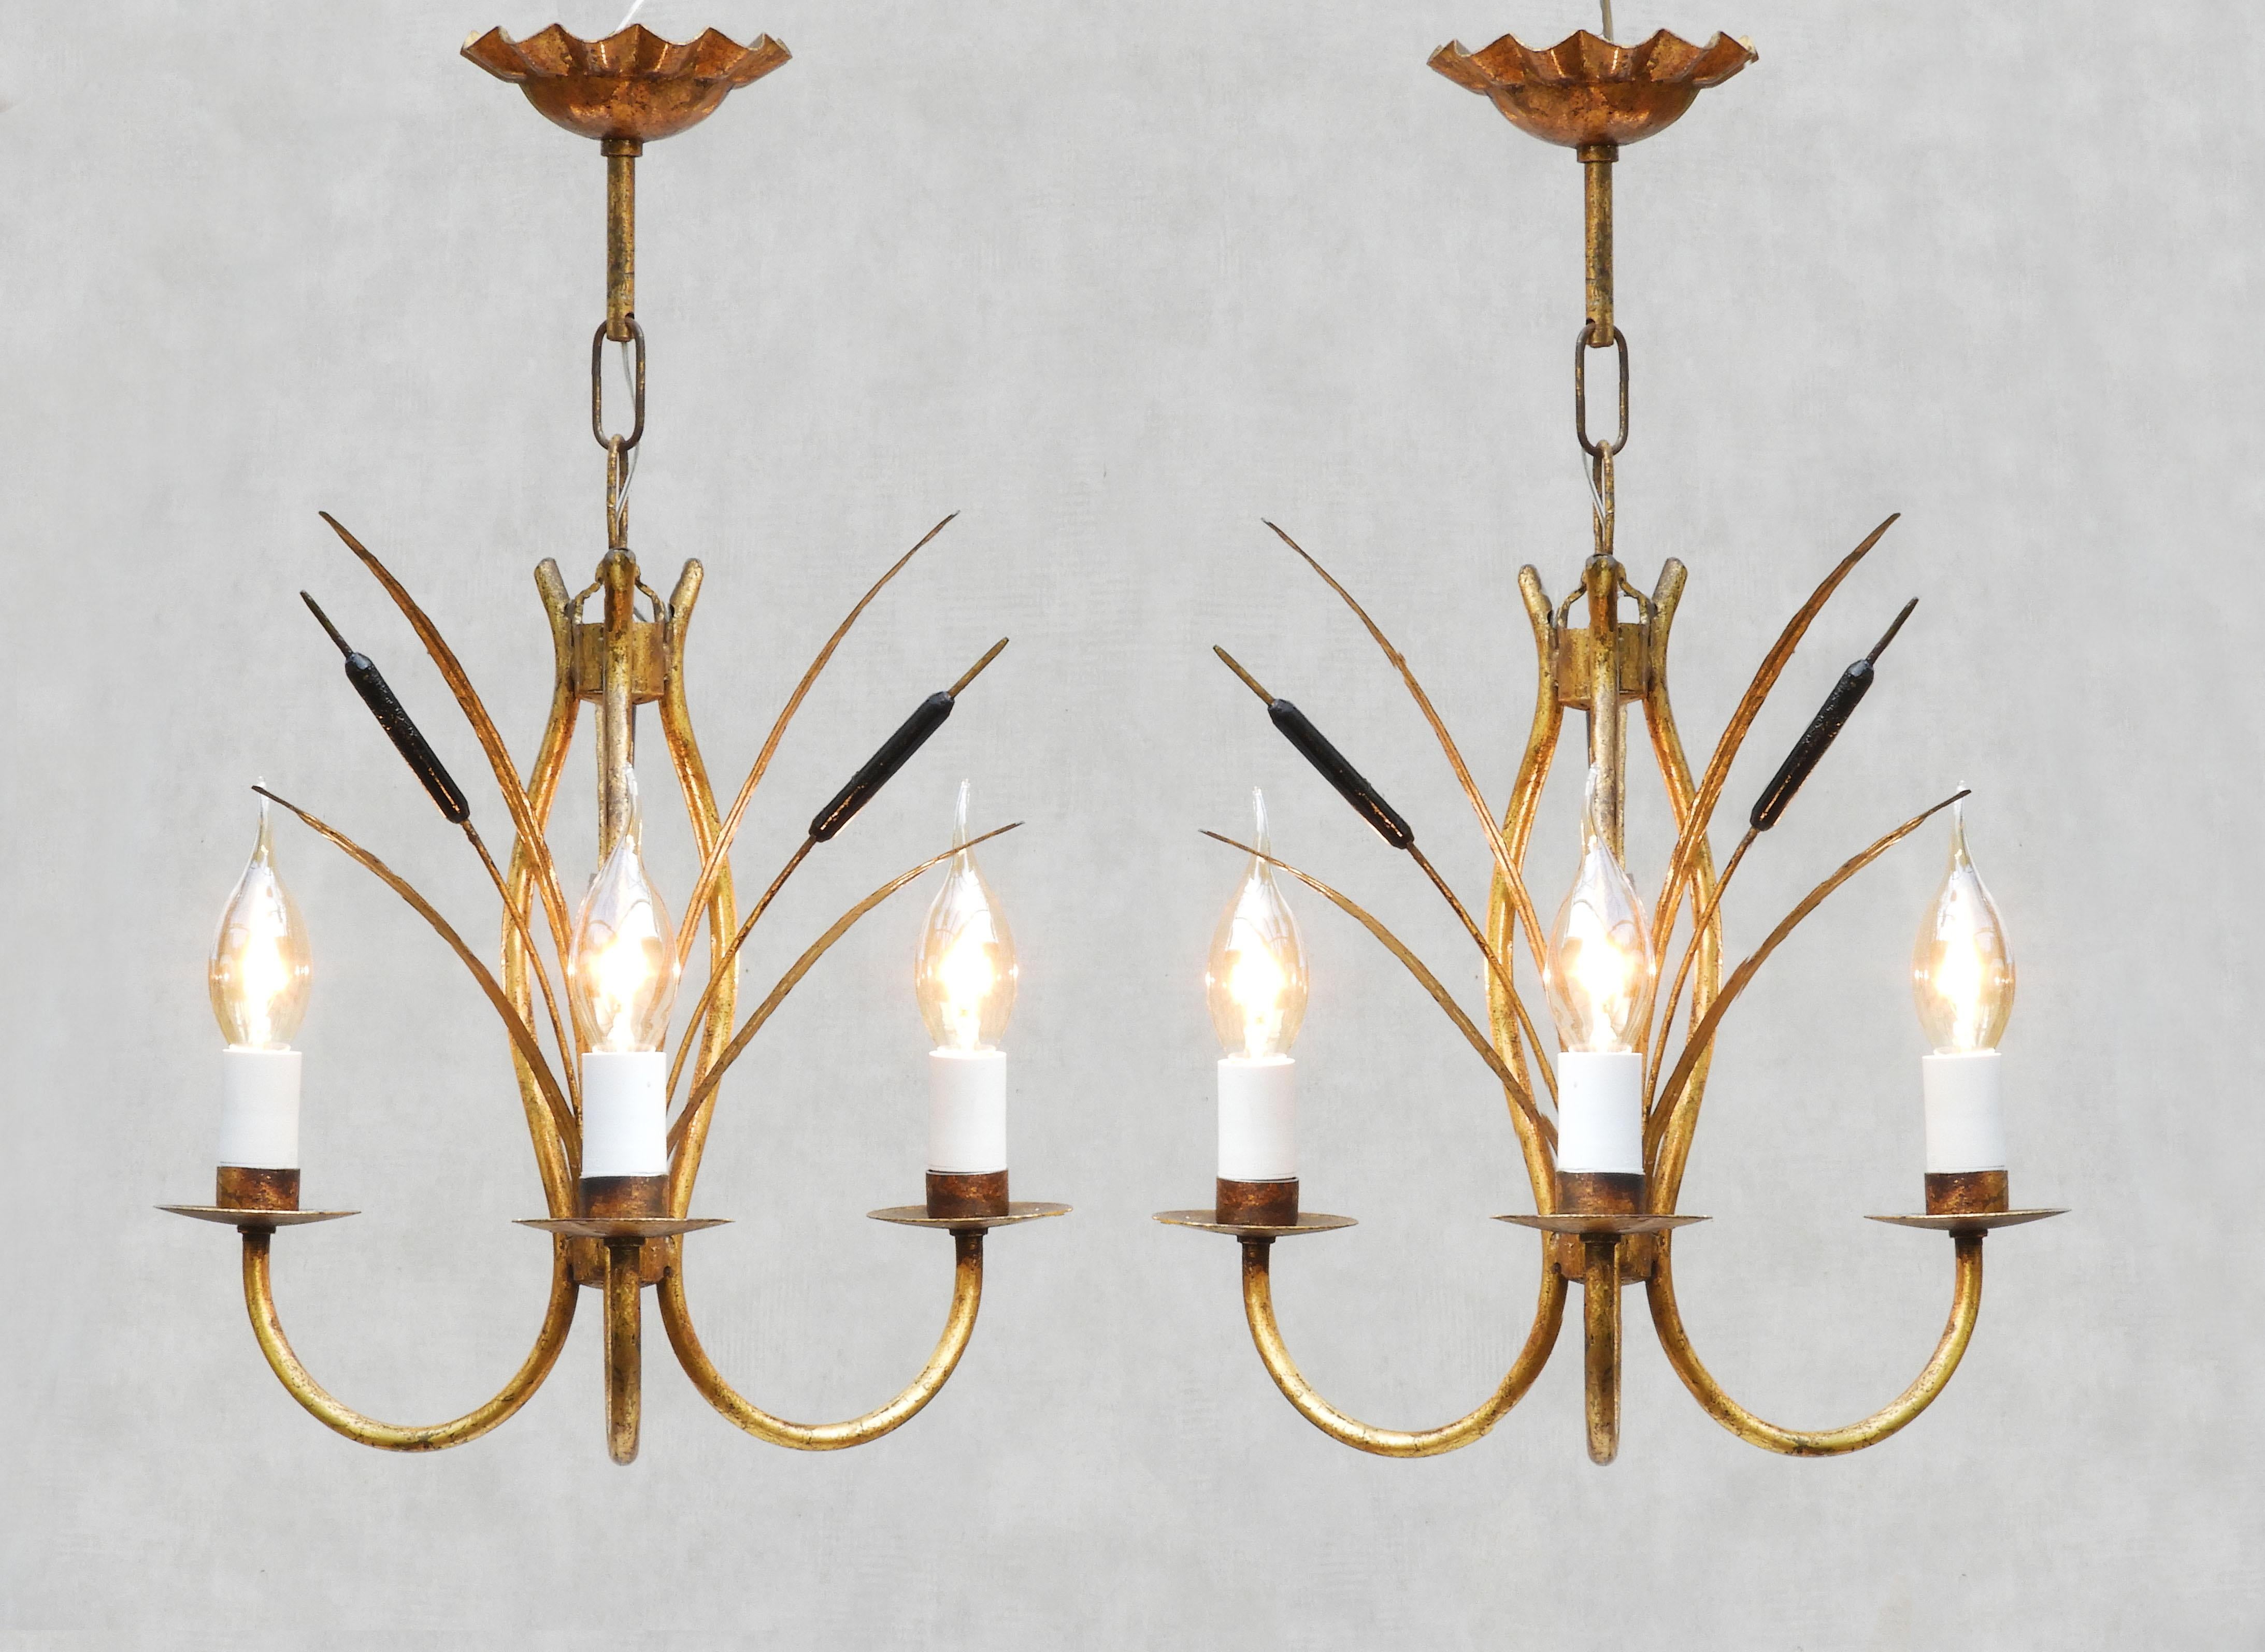 Gorgeous duo of botanical-themed pendant ight chandeliers from mid-20th century France.
A pair of gilded tôle Maison Jansen style chandeliers with a central spray of bulrushes long slender foliage surrounded by three 'faux' candlelights. In great